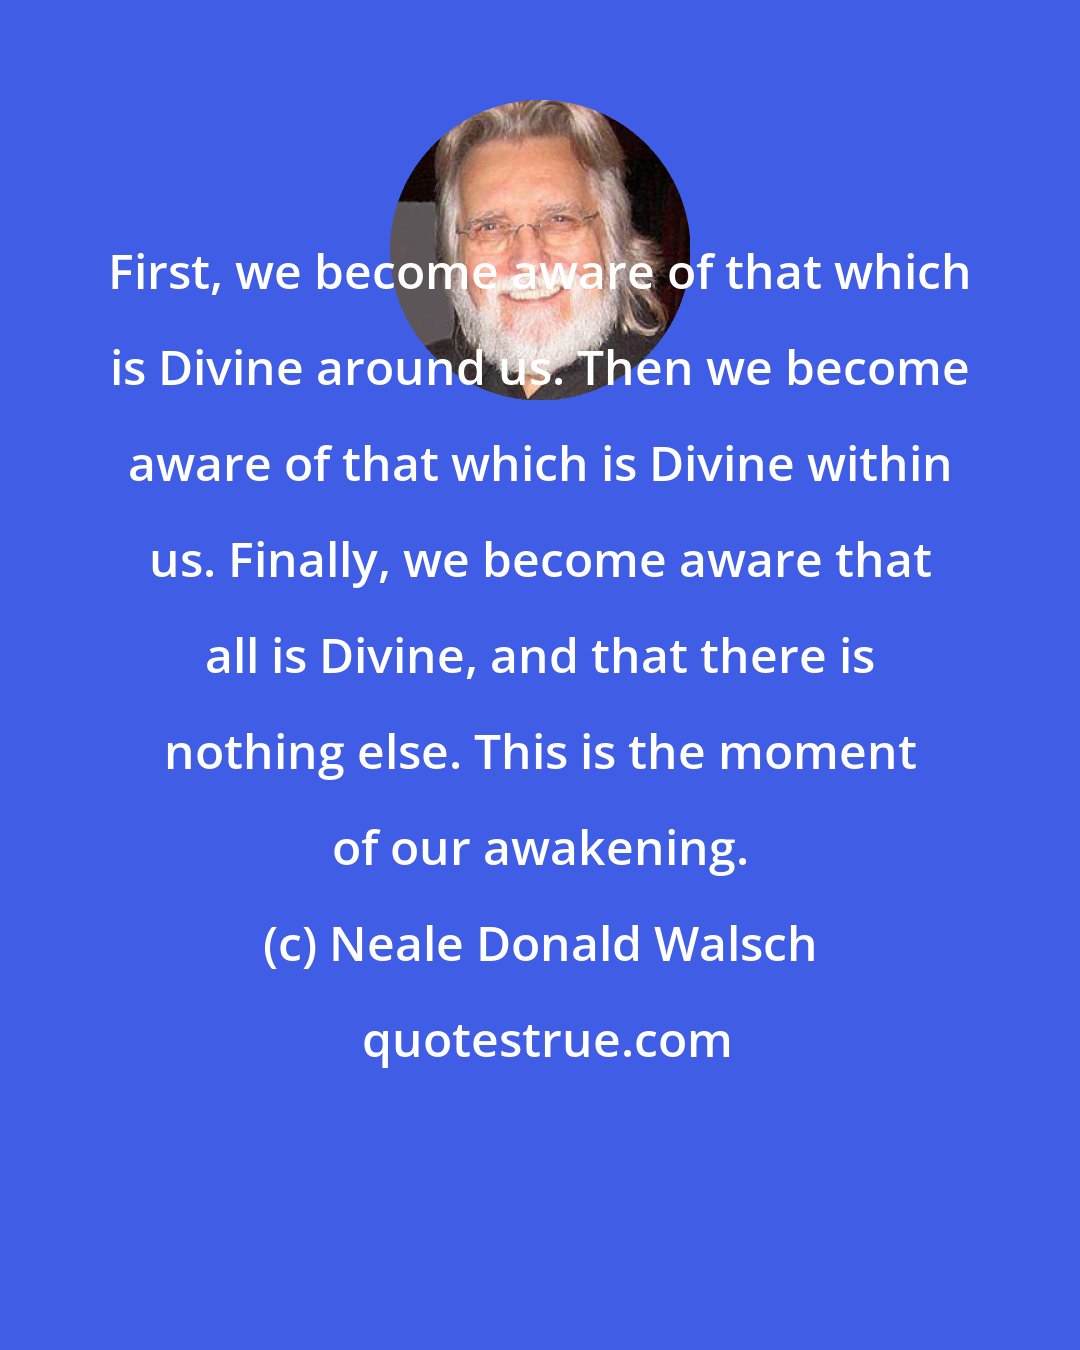 Neale Donald Walsch: First, we become aware of that which is Divine around us. Then we become aware of that which is Divine within us. Finally, we become aware that all is Divine, and that there is nothing else. This is the moment of our awakening.